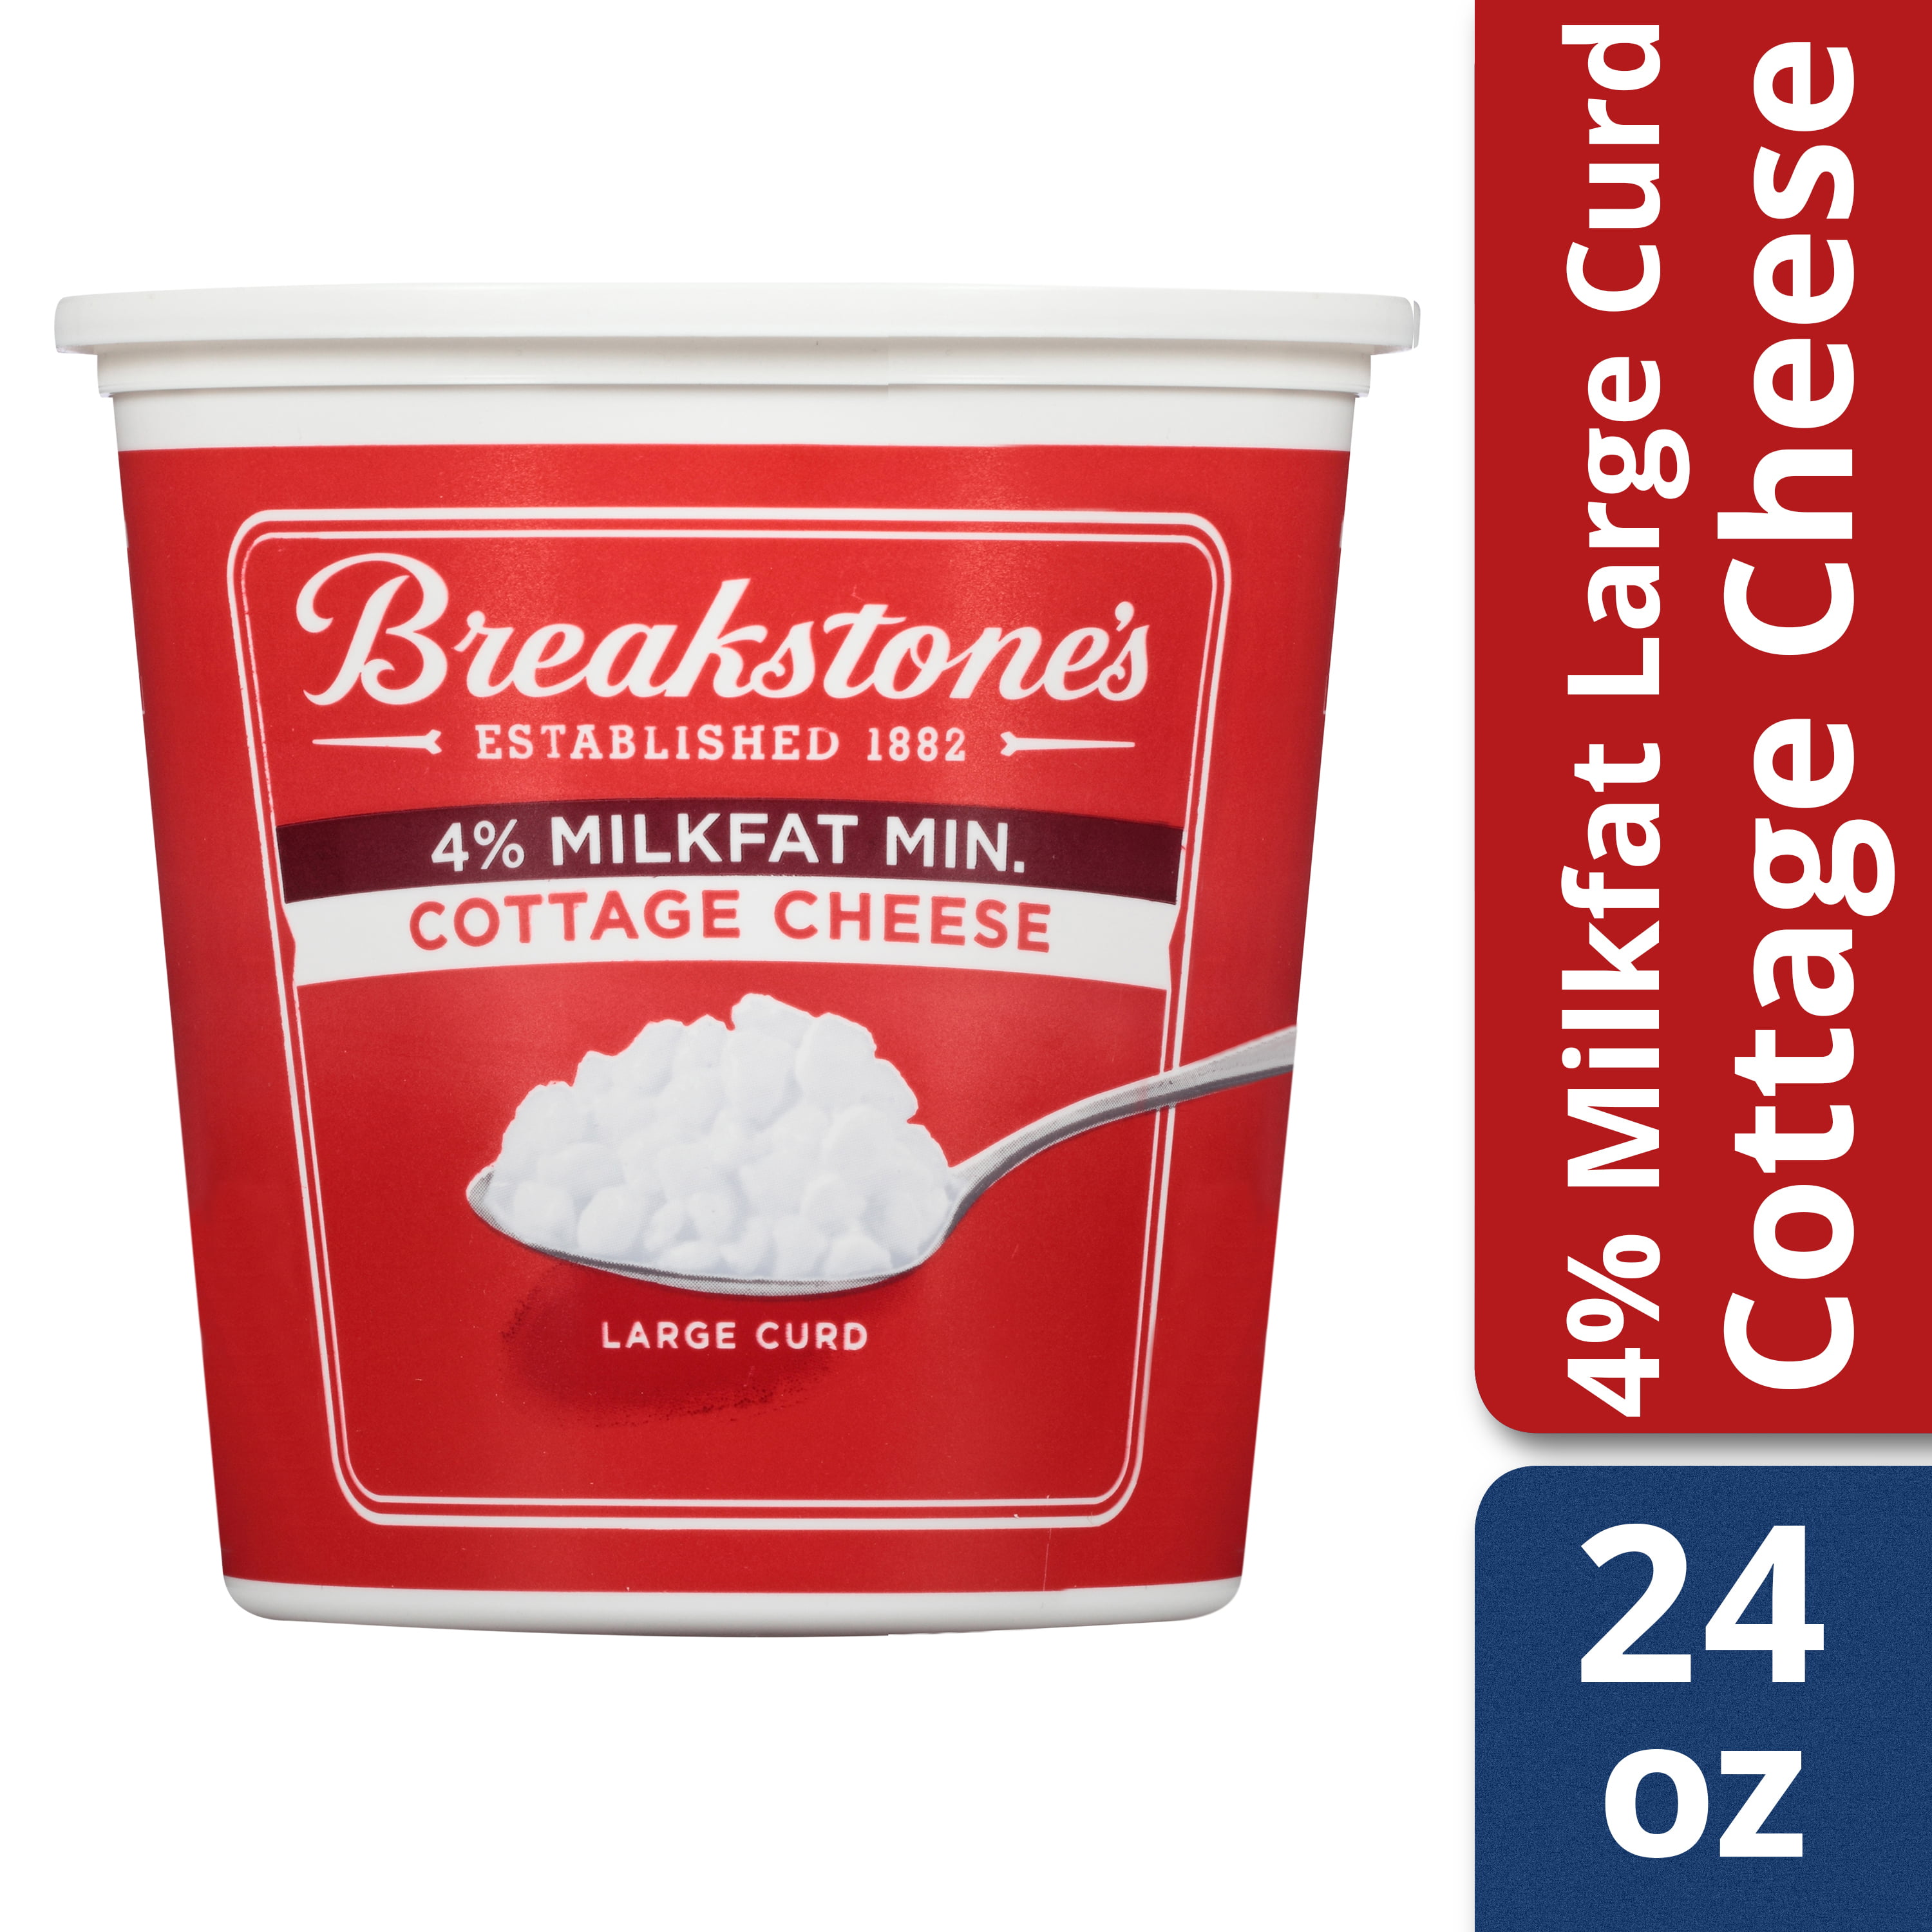 Breakstone S Large Curd 4 Milkfat Cottage Cheese 24 Oz Tub